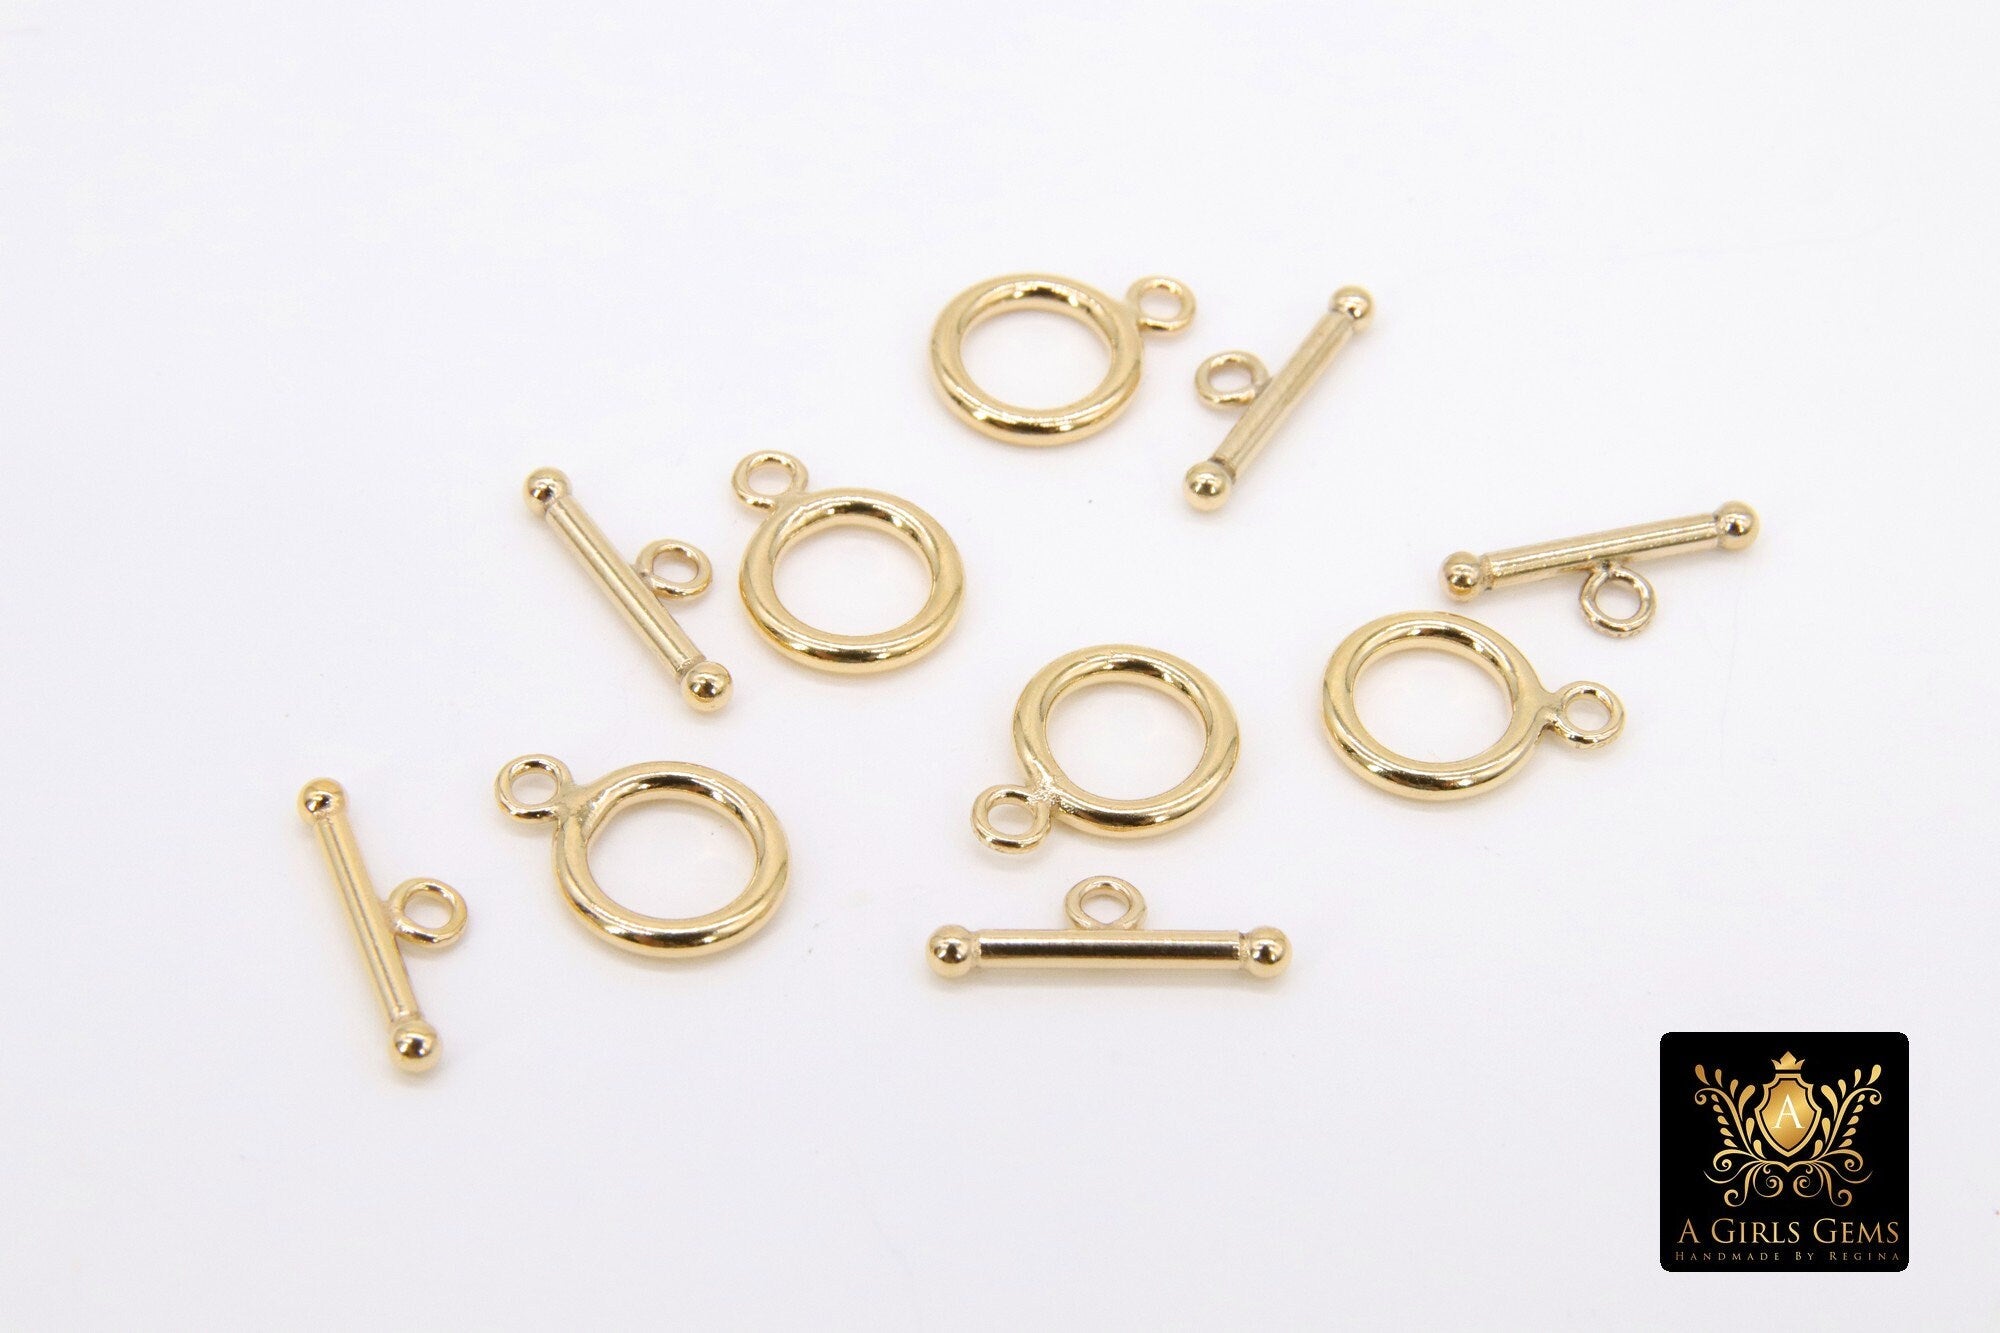 14 K Gold Toggle Clasp Set, Ball End 12 x 9.0 Gold Filled Toggle Ring #2800, 14 mm Ball End T Bar Jewelry Findings